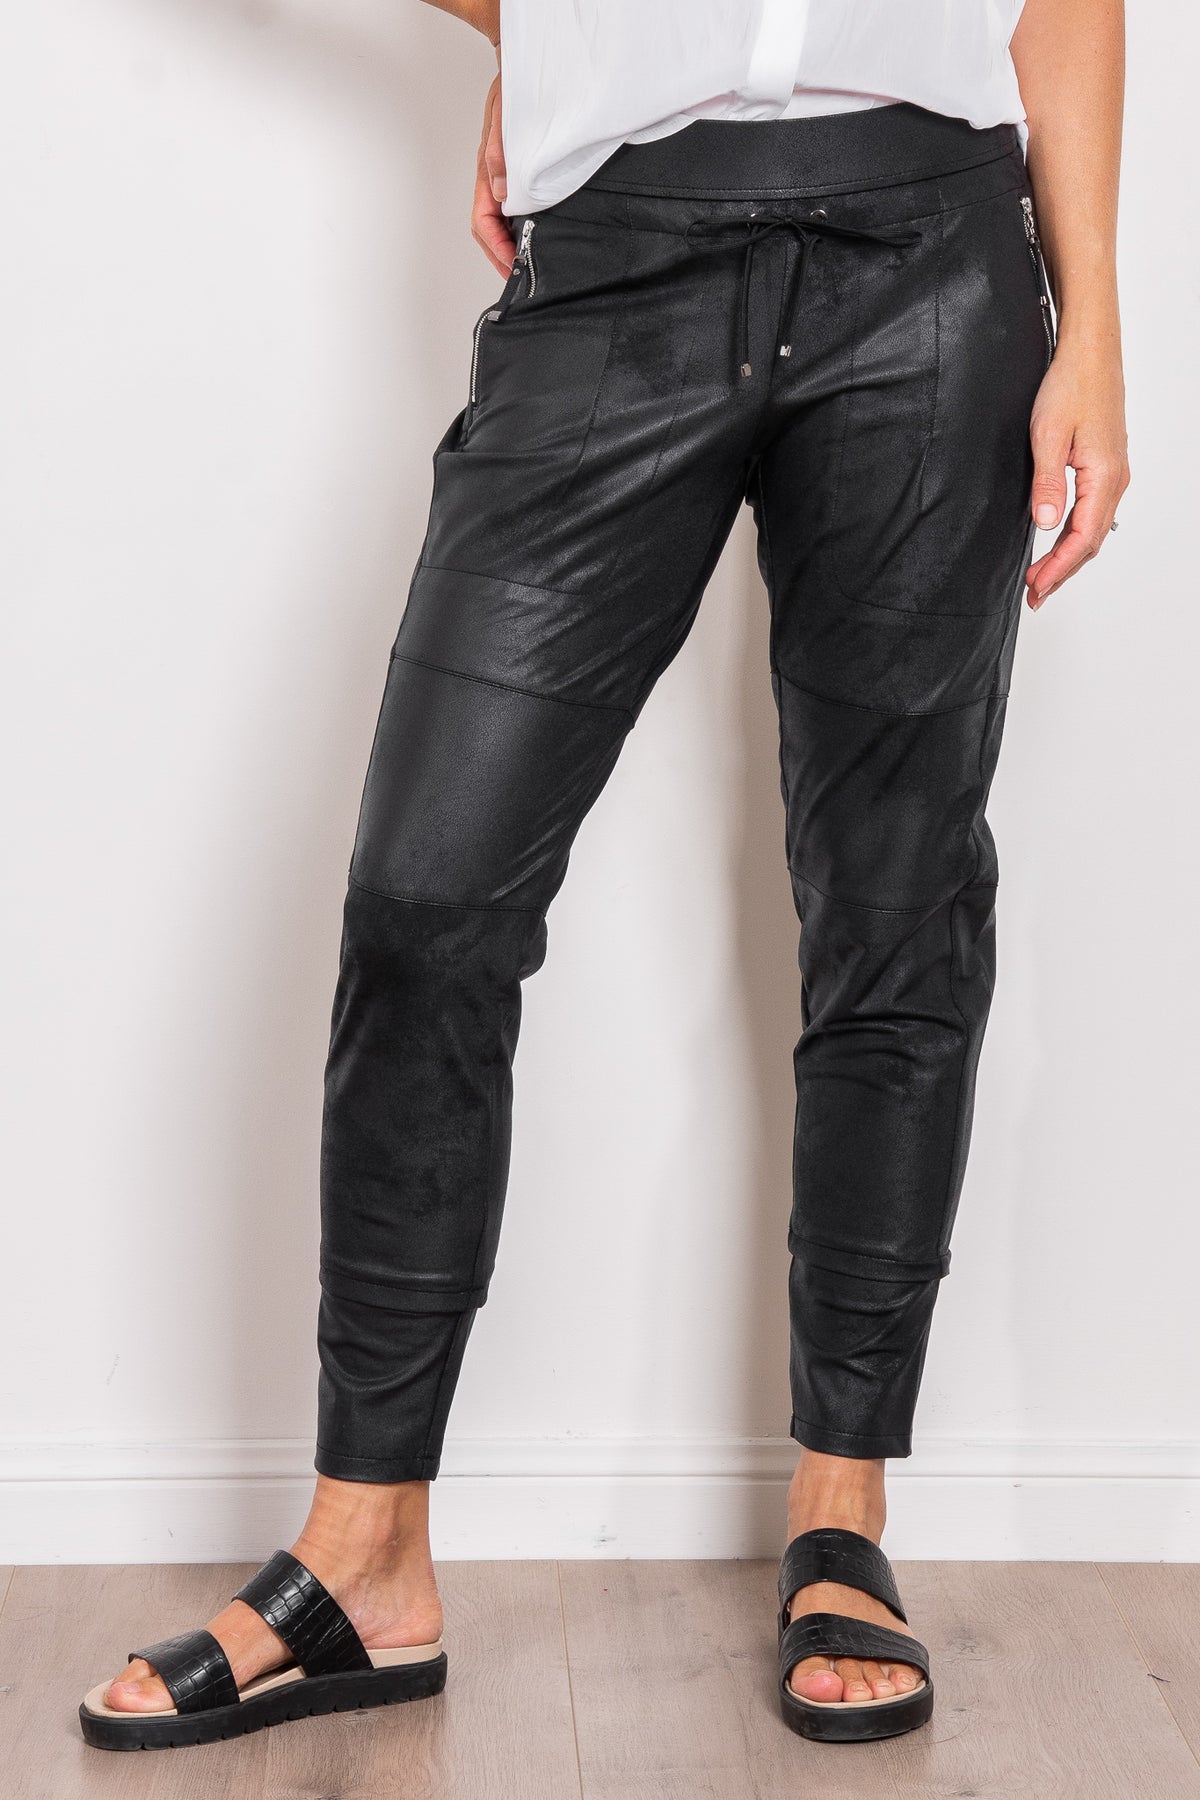 Raffaello Rossi Candy Leather Jersey Pant